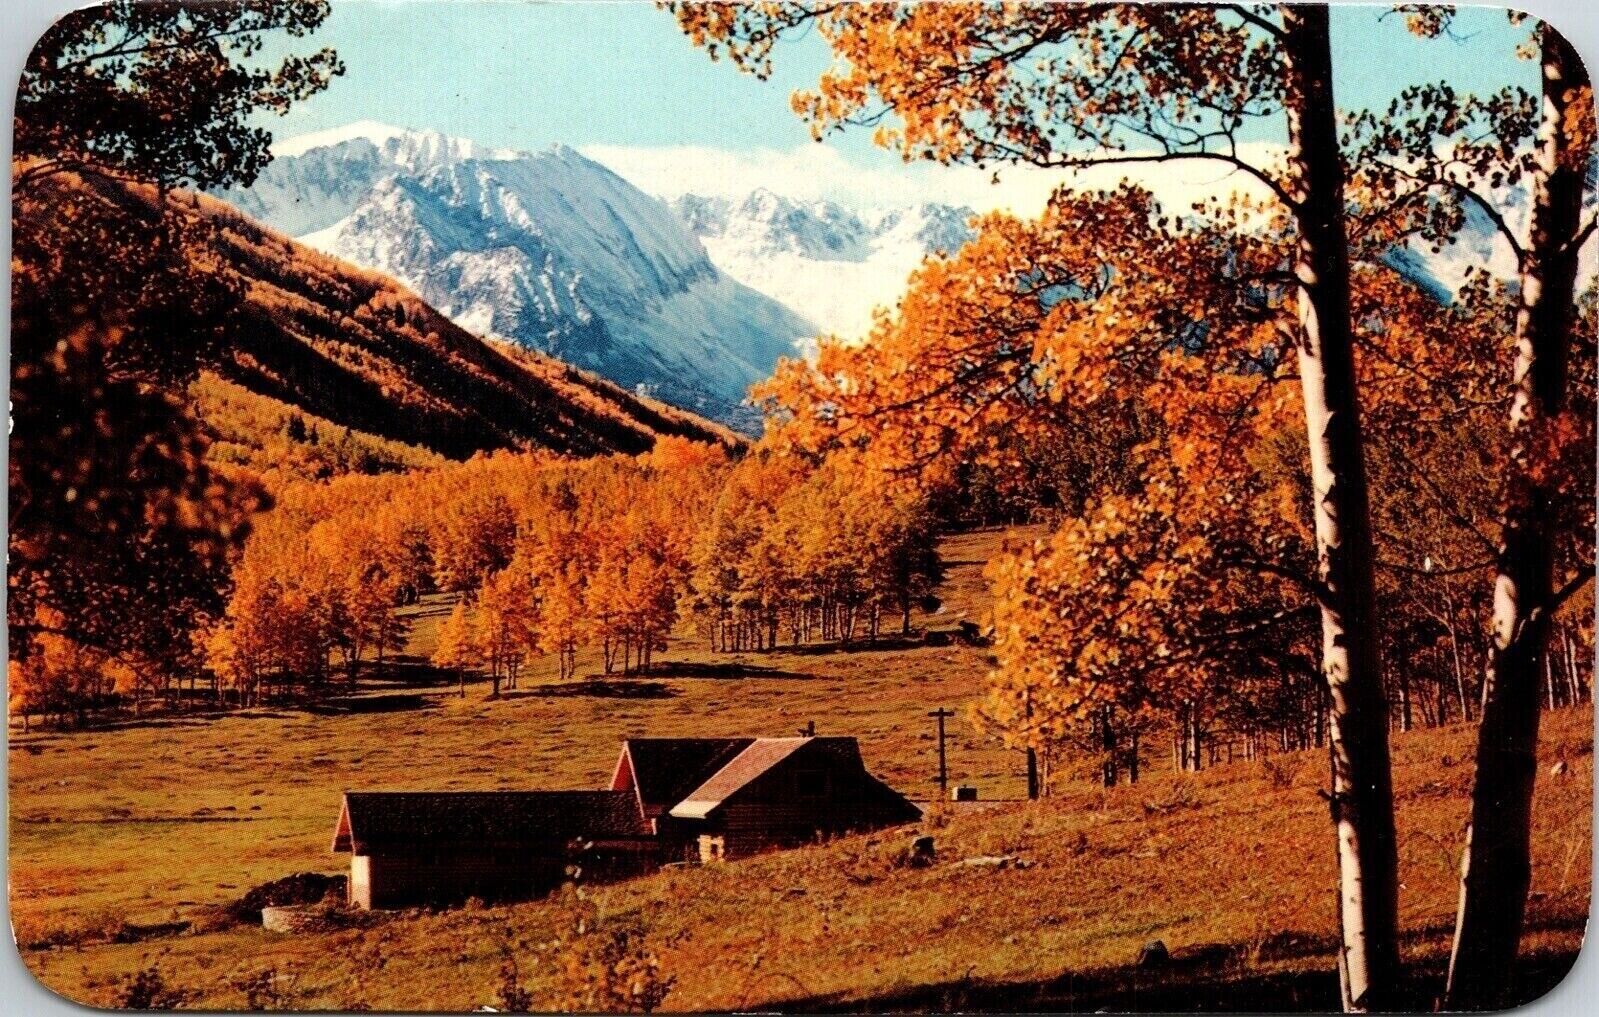 Autumn Rockies Valleys Fall Colors Snowcapped Mountains Postcard PM Hays KS WOB 